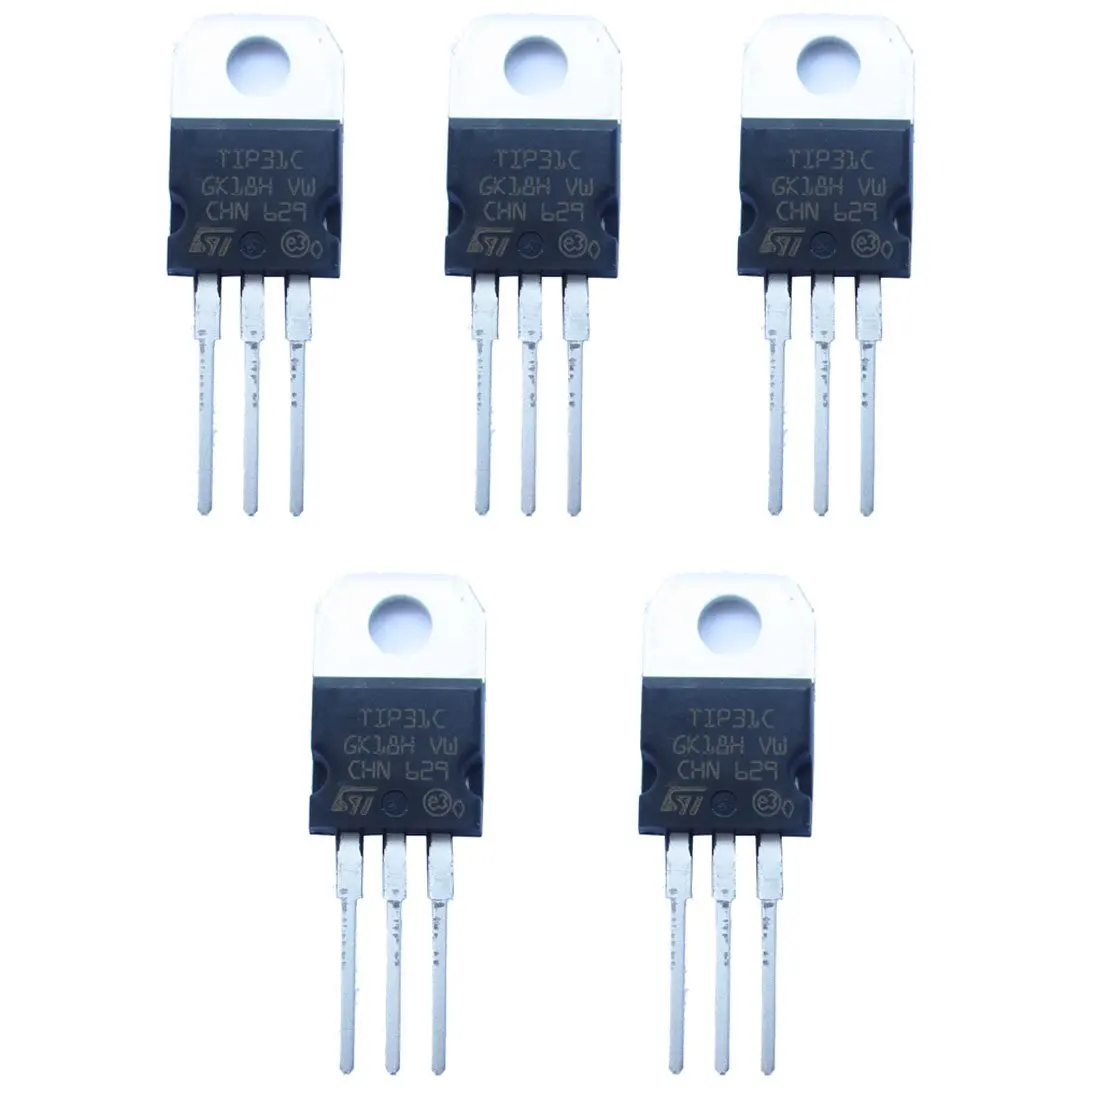 TIP31C NPN Silicon Power Transistors 3A 100V TO220 Package 50 Pack